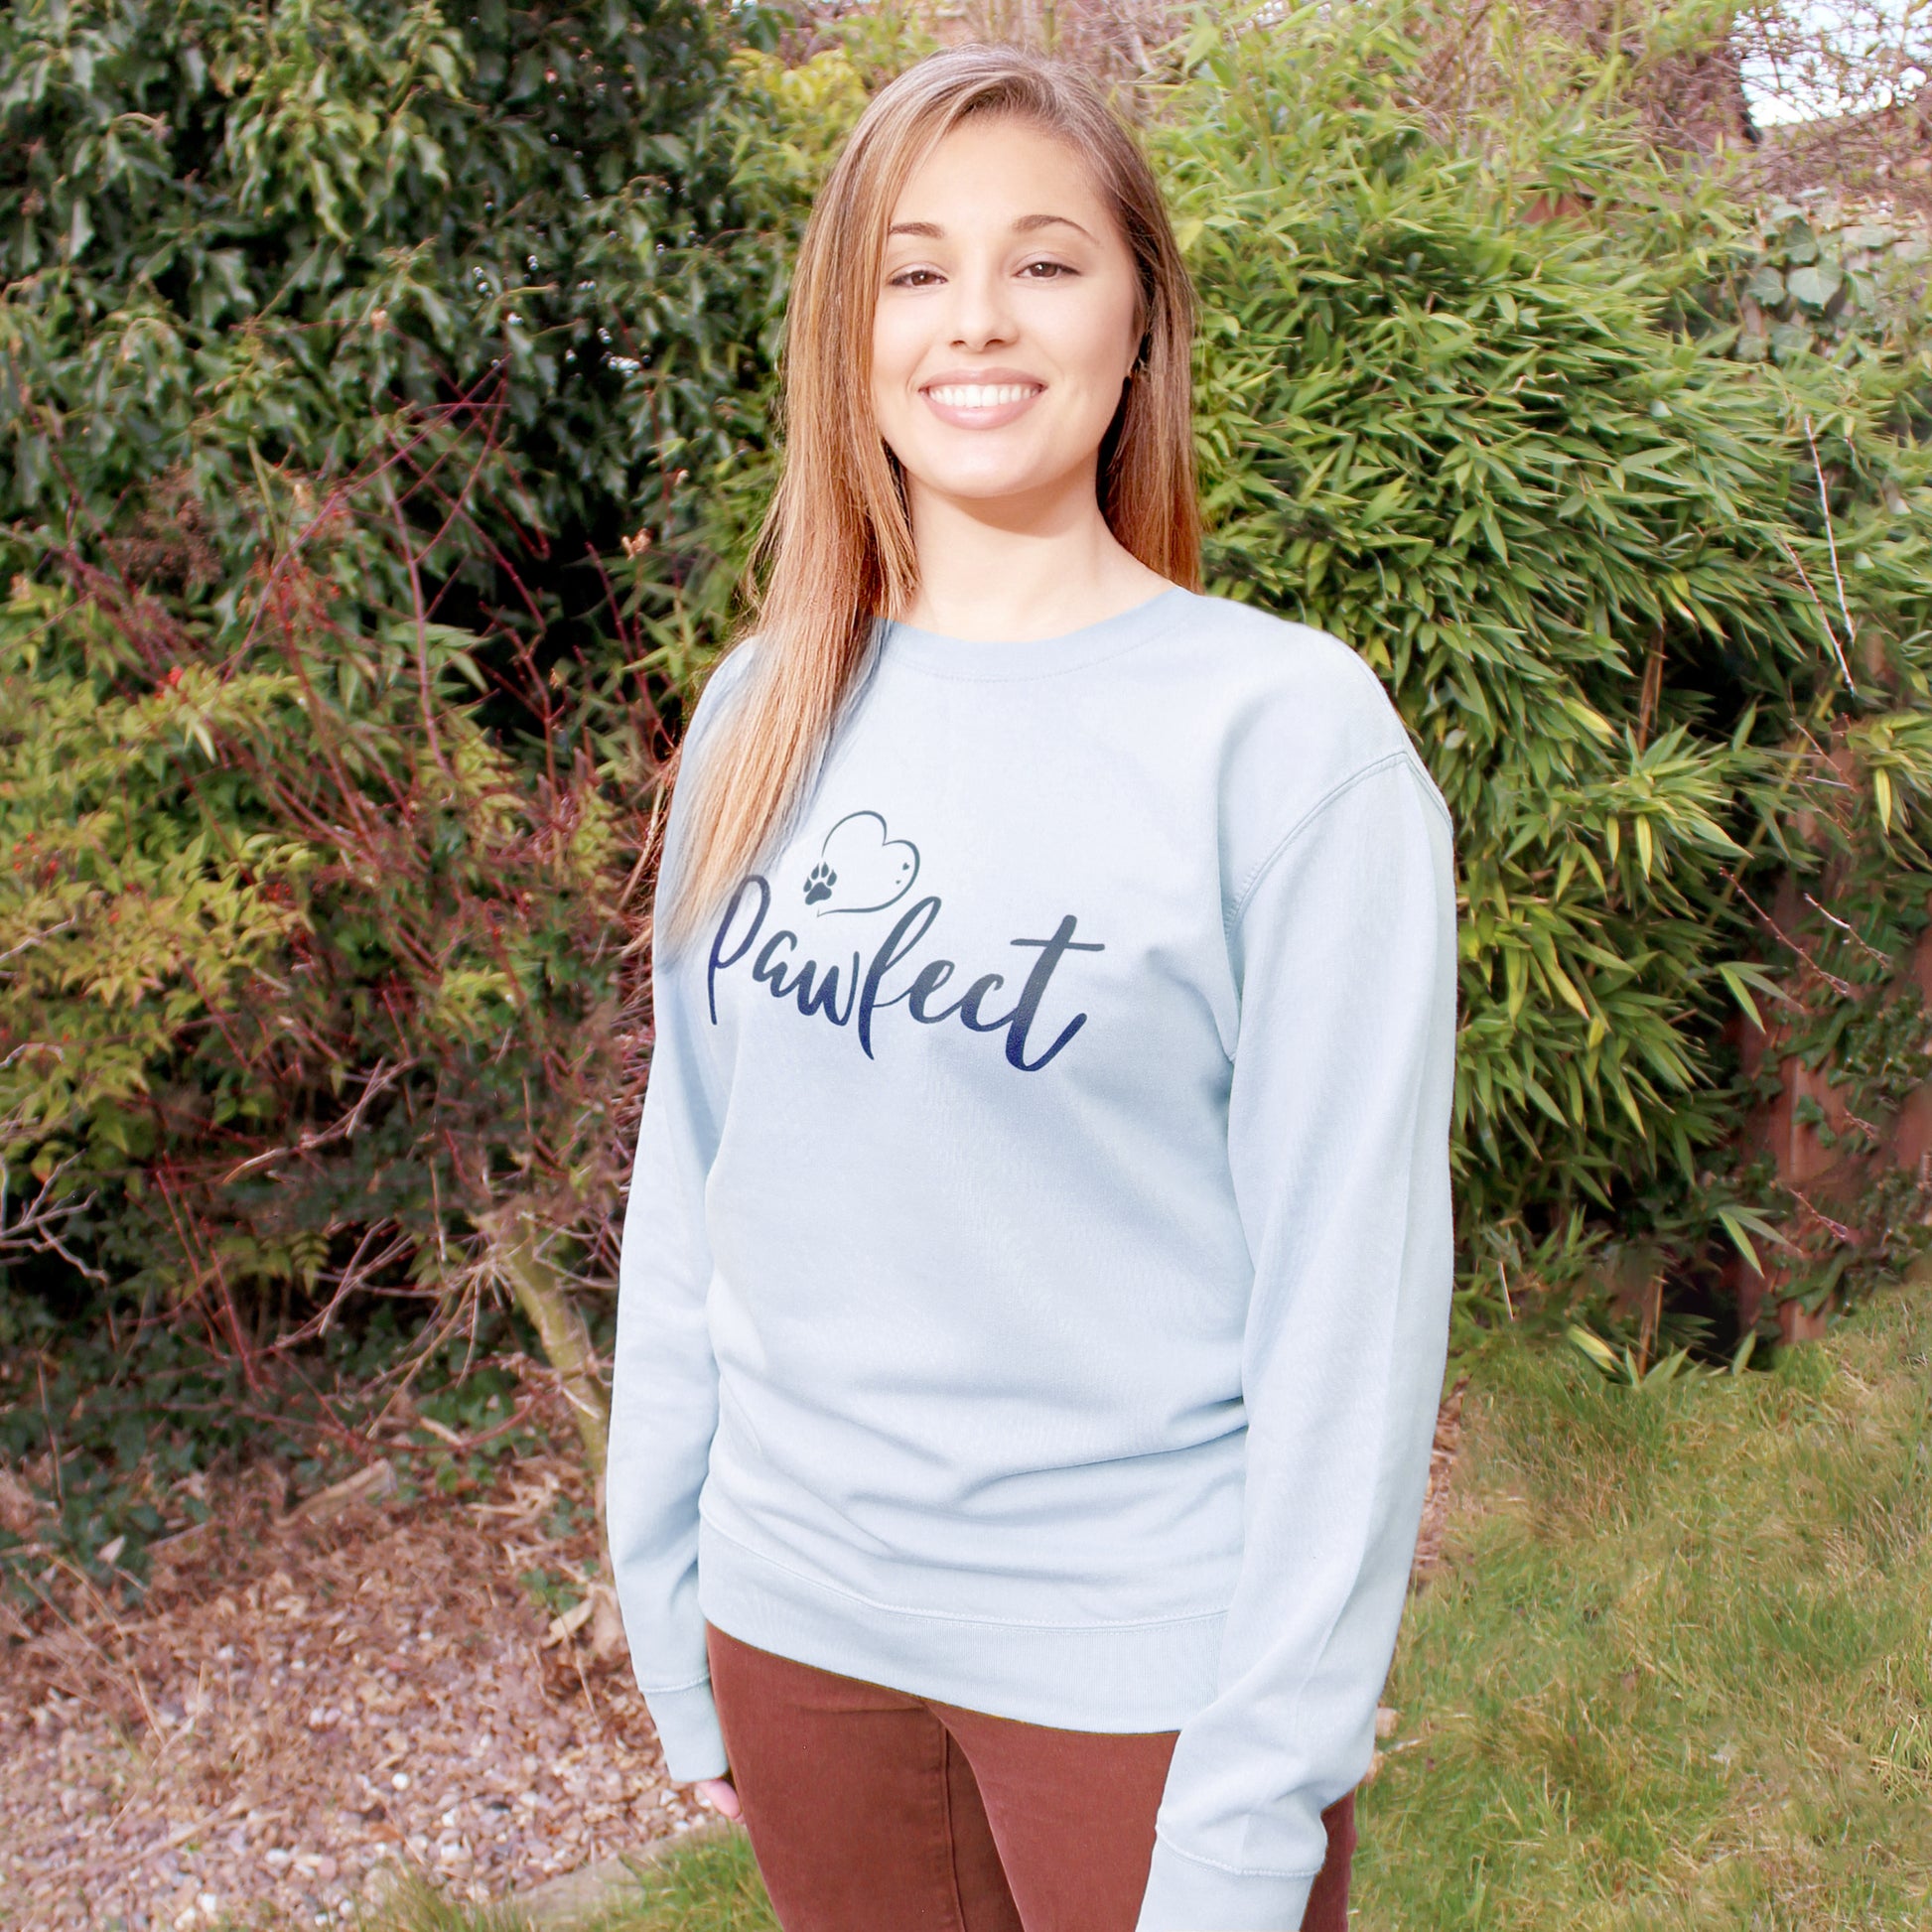 Light blue relaxed fit long sleeve sweatshirt worn by caucasian woman with long brown hair. Slogan sweater design wording Pawfect in dark blue font and navy blue grey heart outline above with dog paw print within outline. Woman wears rust colour jeans and is stood in outdoors in a garden with plants behind